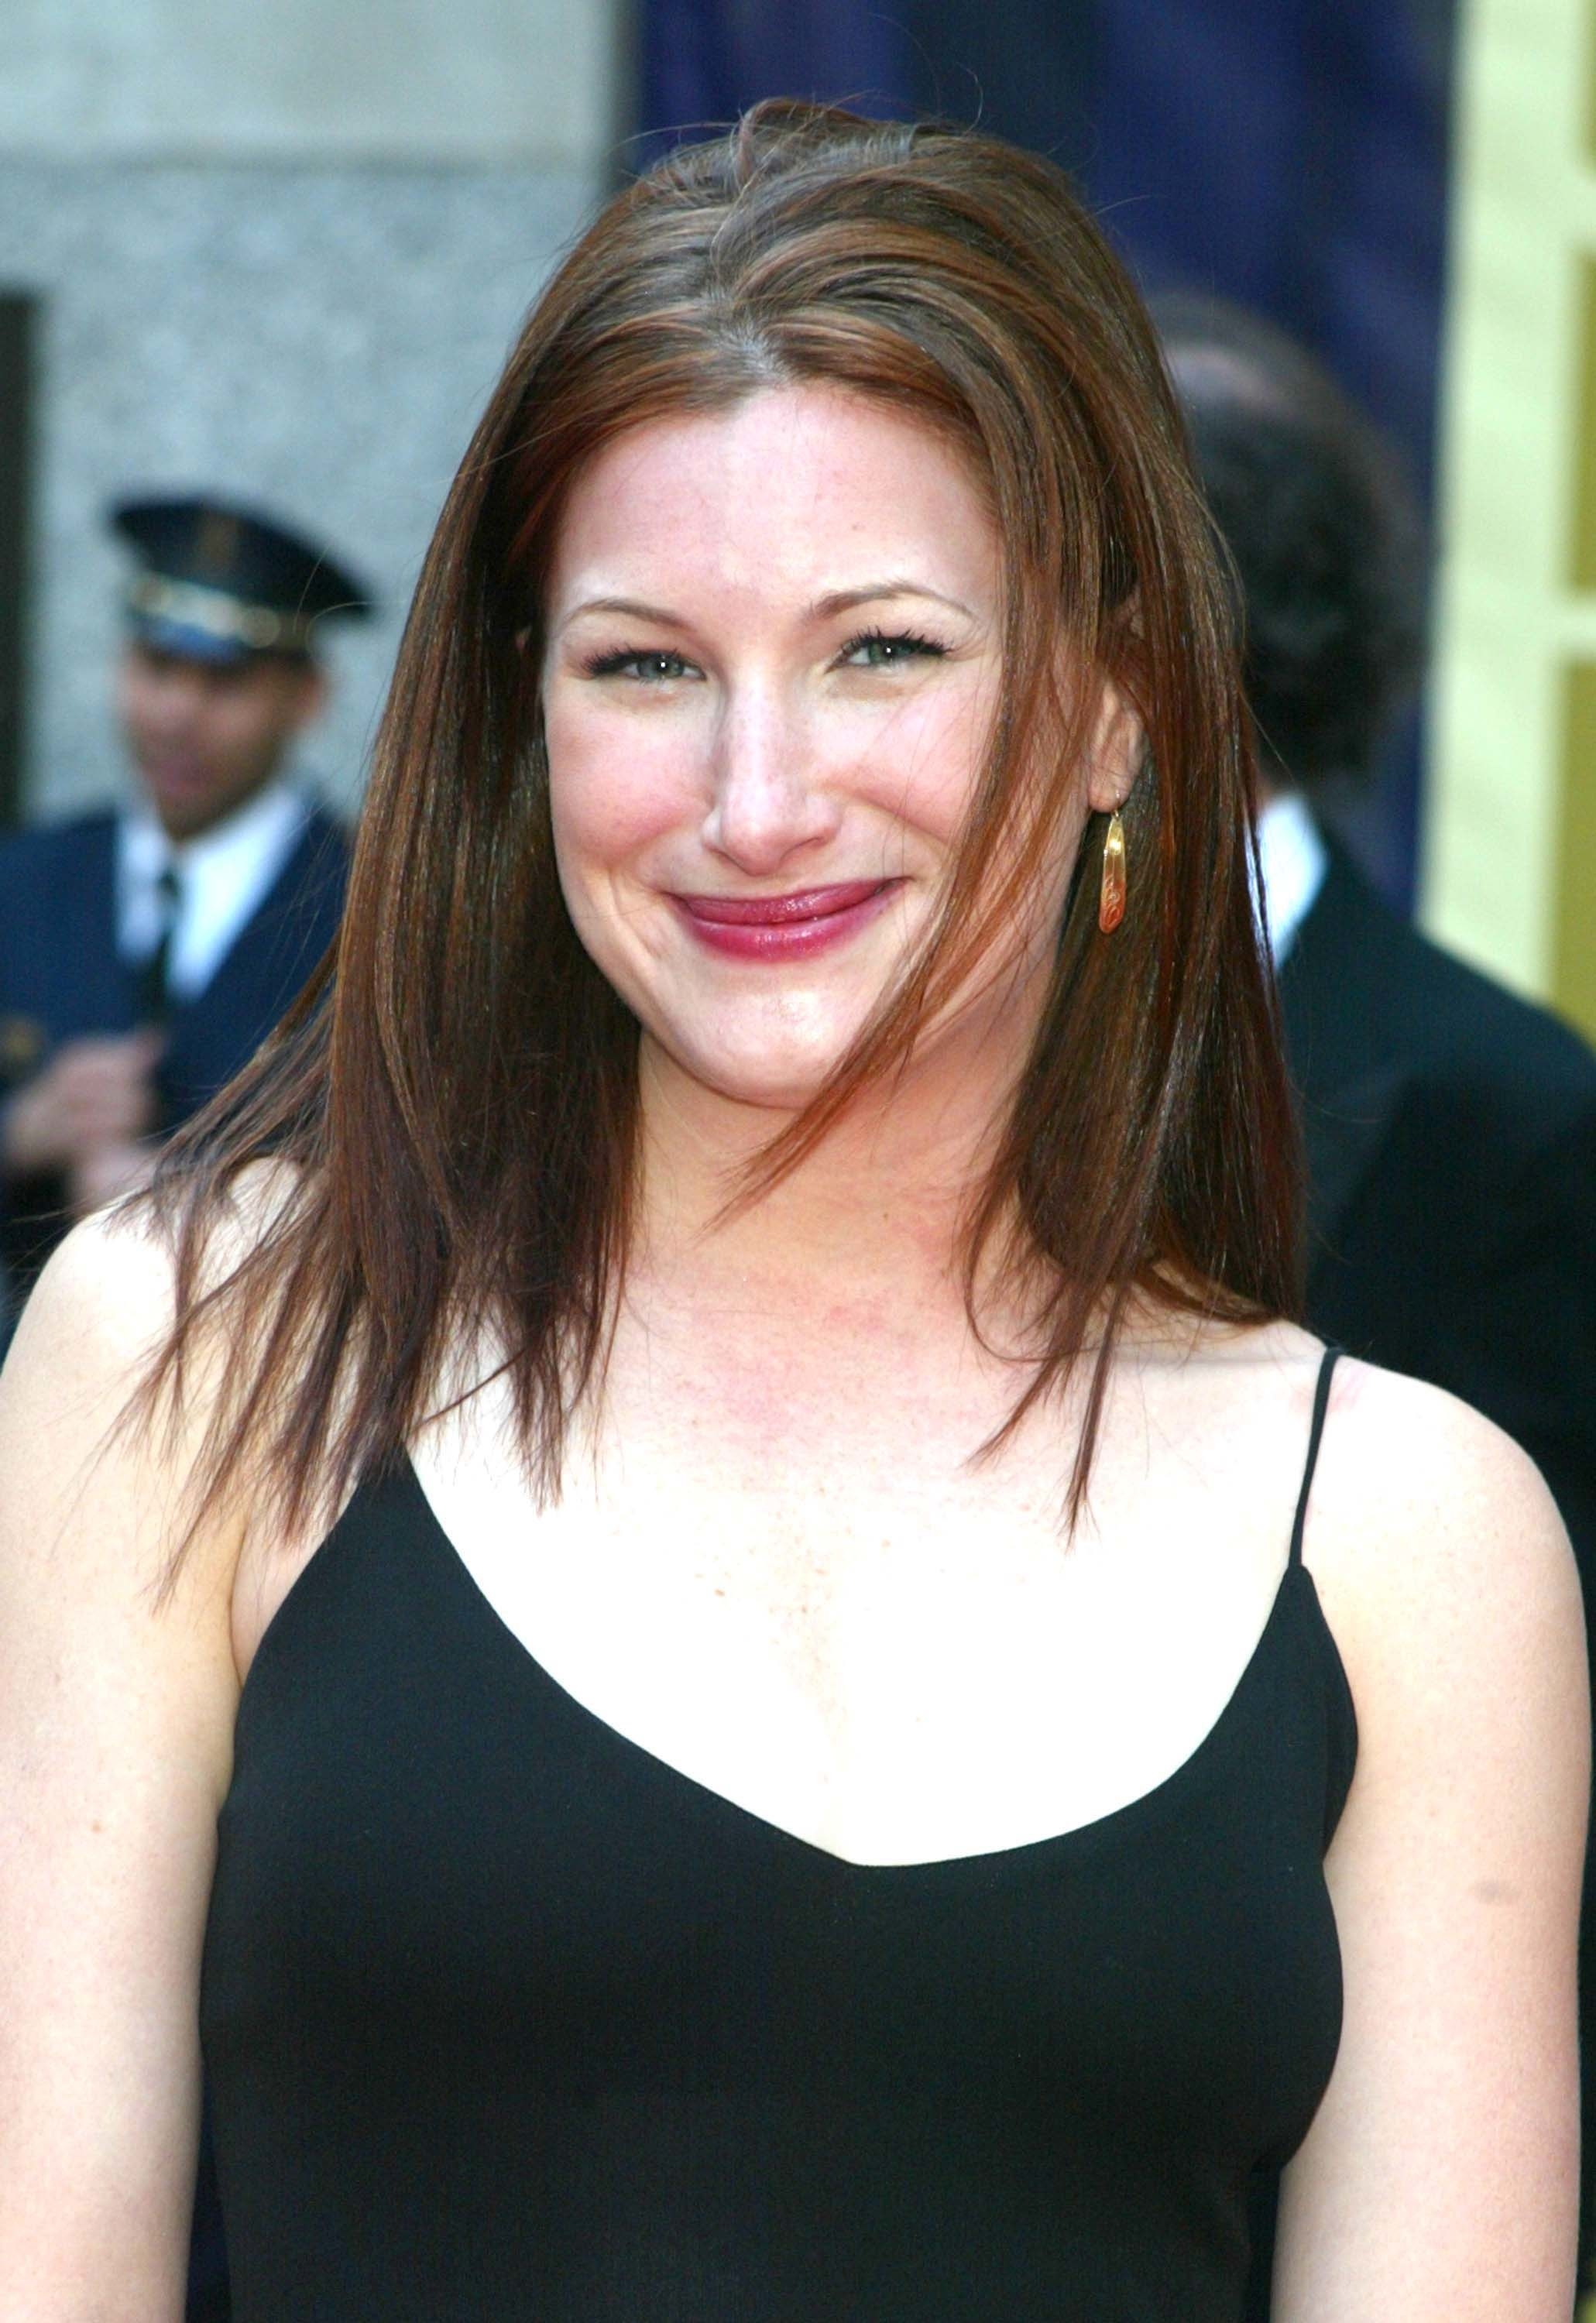 Hahn at the 75th anniversary celebration of Rockefeller Plaza in 2002